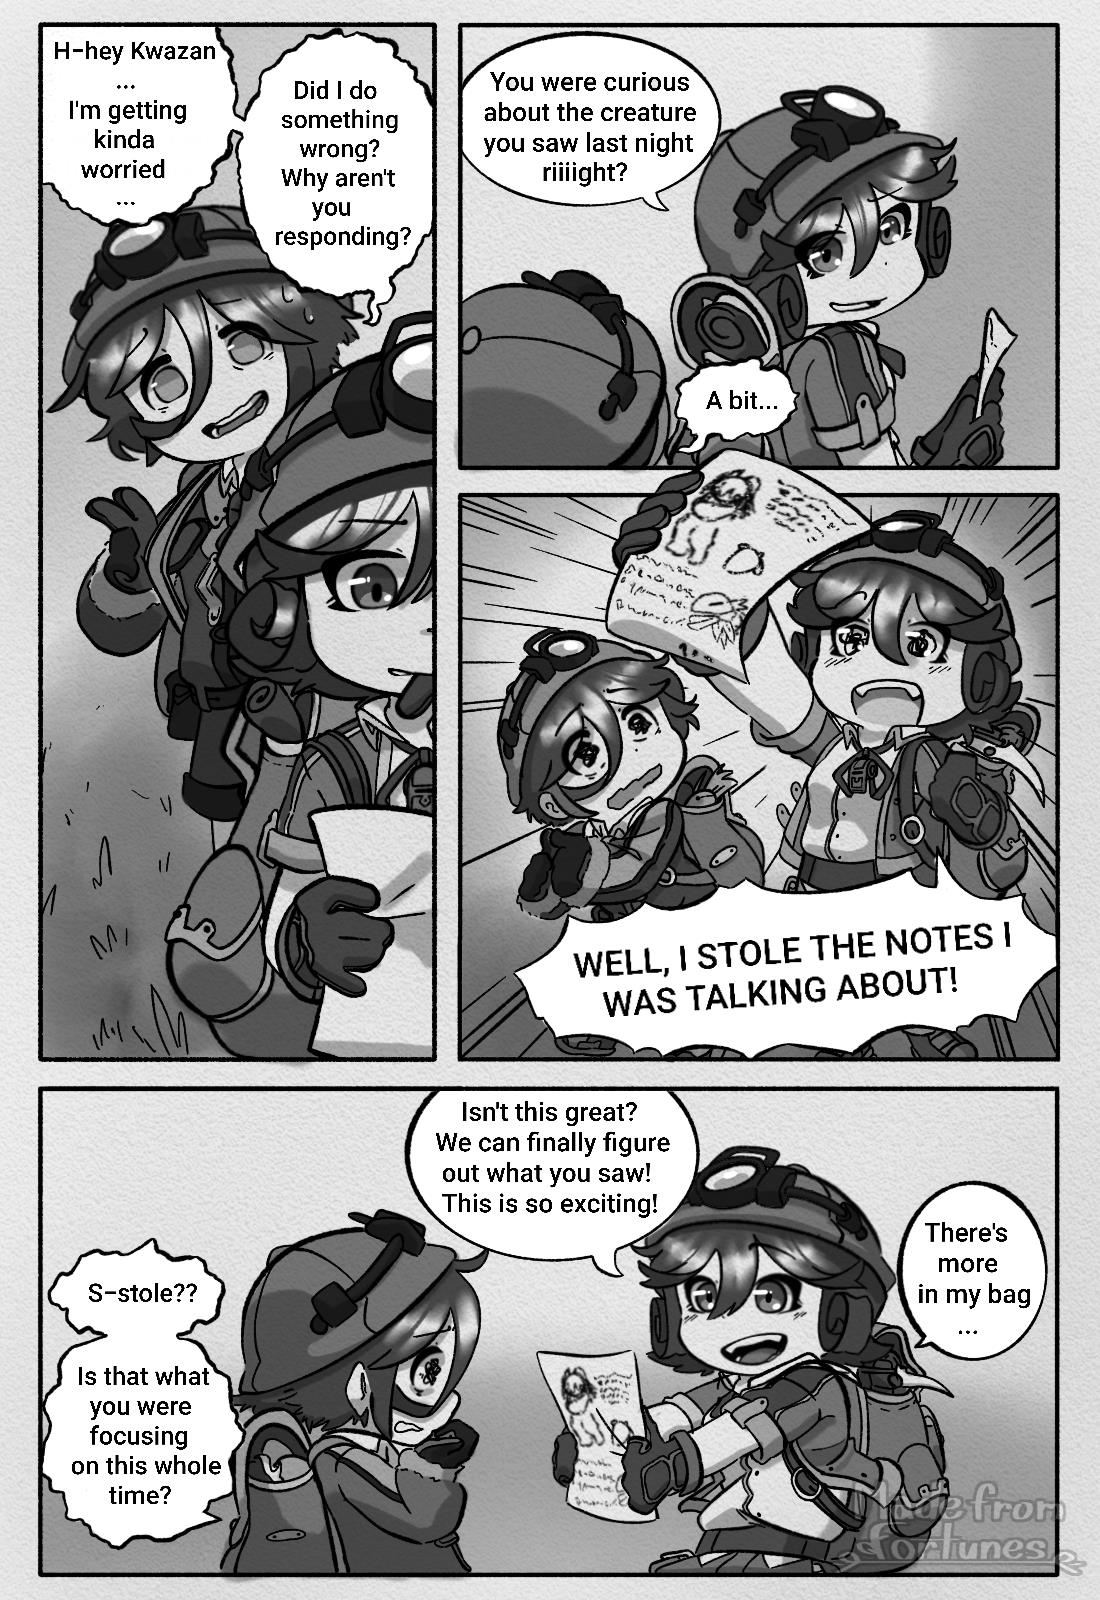 Made From Fortunes (Made In Abyss Fanmade Comic) - chapter 2 - #6